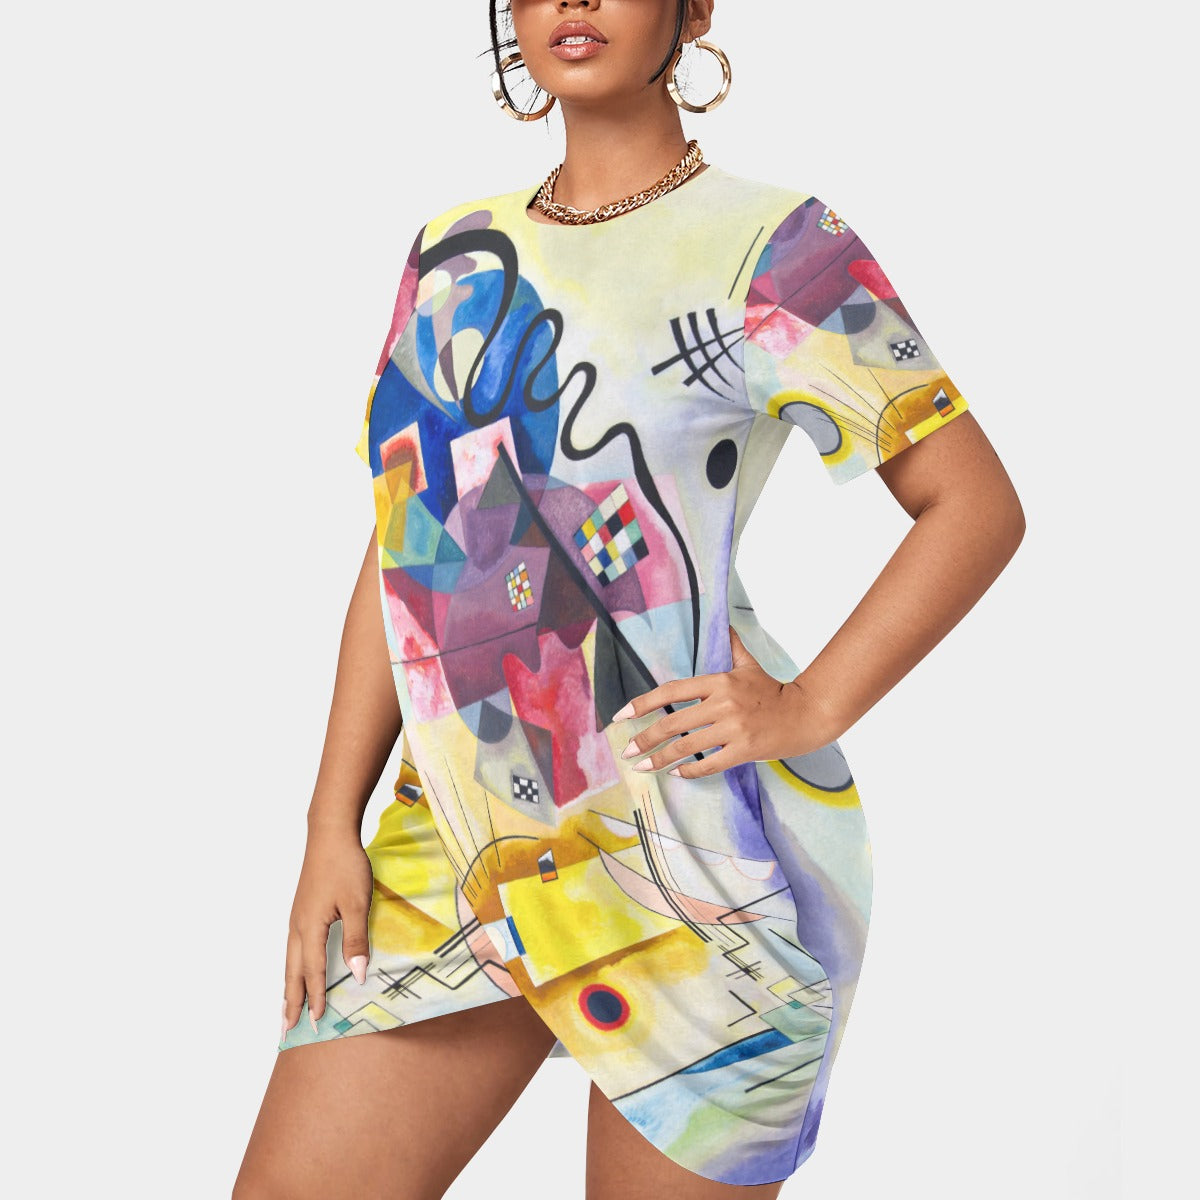 Vibrant women's dress with artistic flair and style